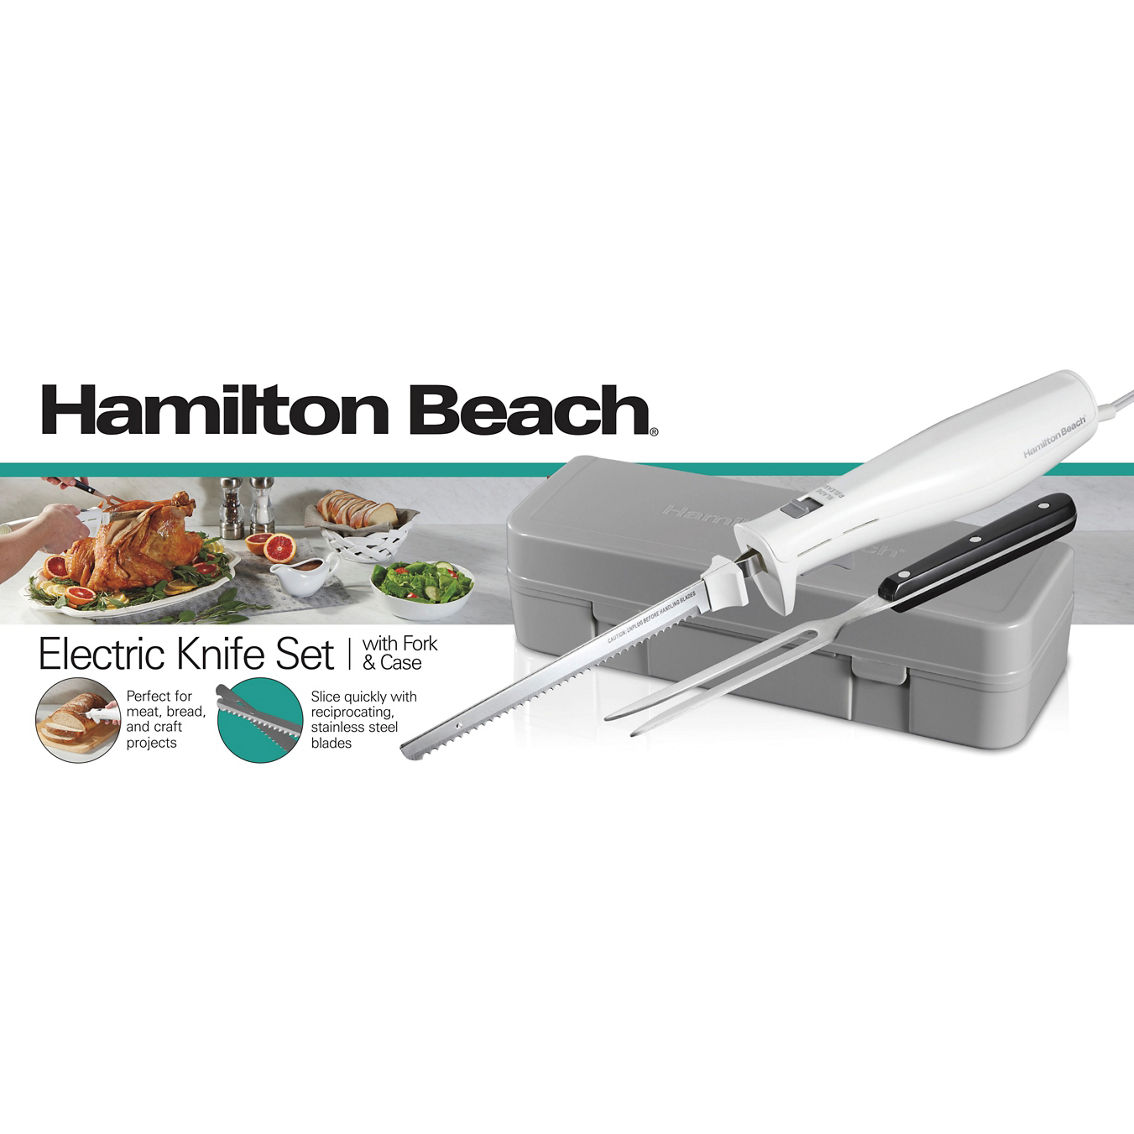 Hamilton Beach Electric Knife Set with Fork and Case - Image 2 of 2